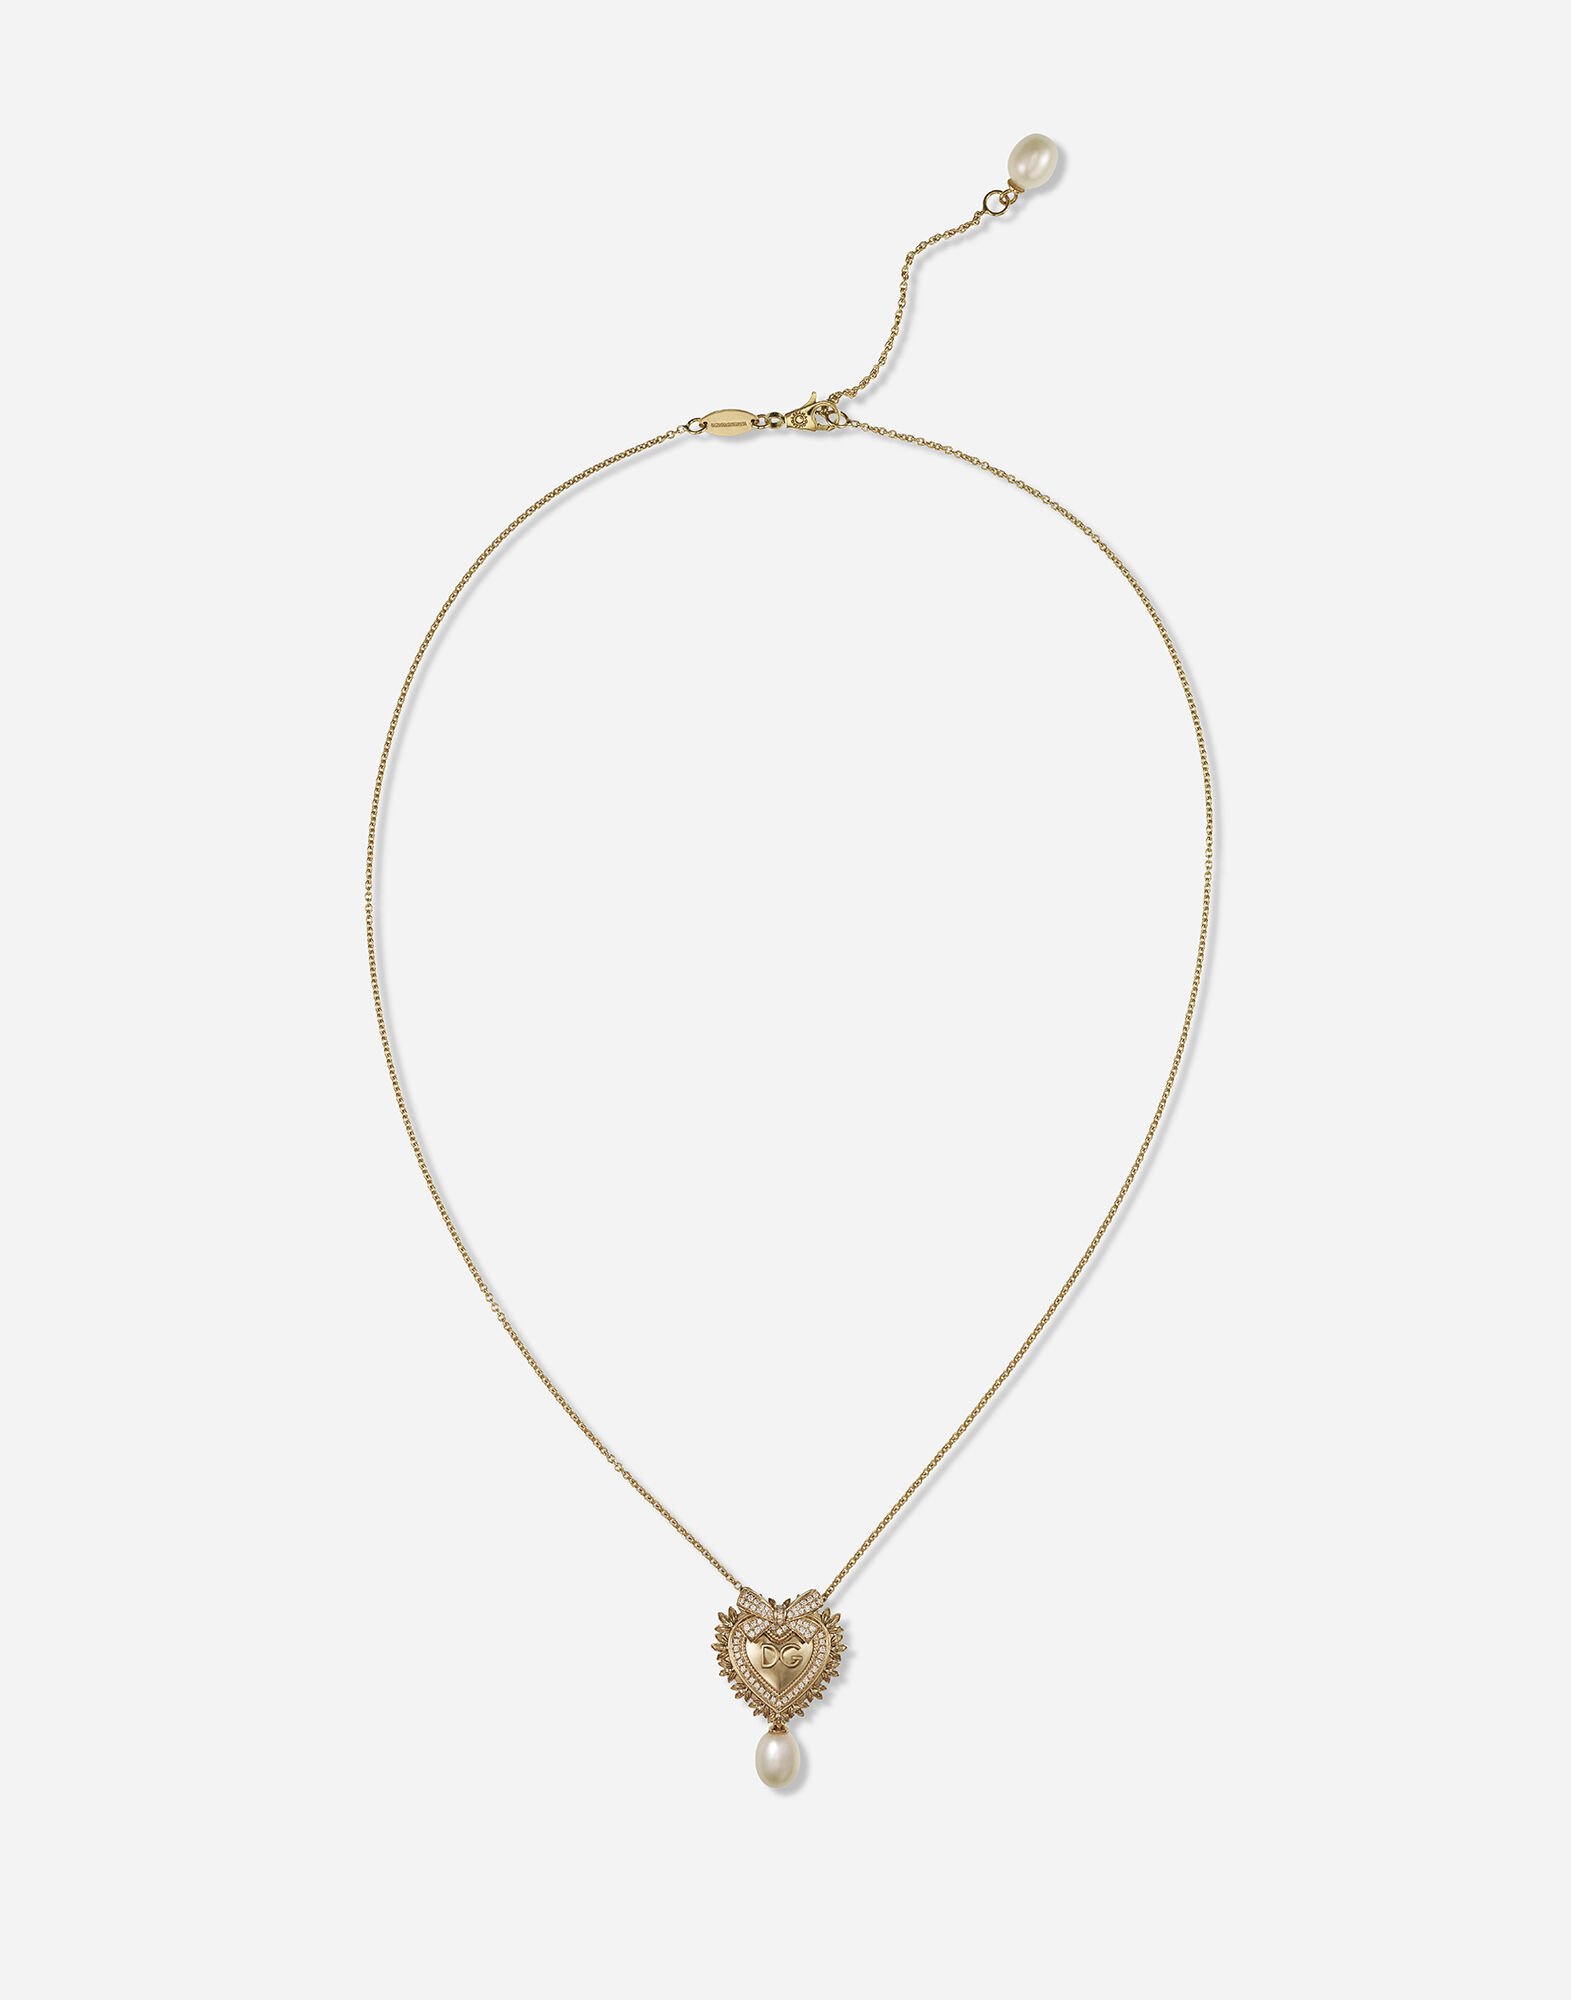 Dolce&Gabbana Devotion necklace in yellow gold with diamonds and pearls Gold WNP6C1W1111